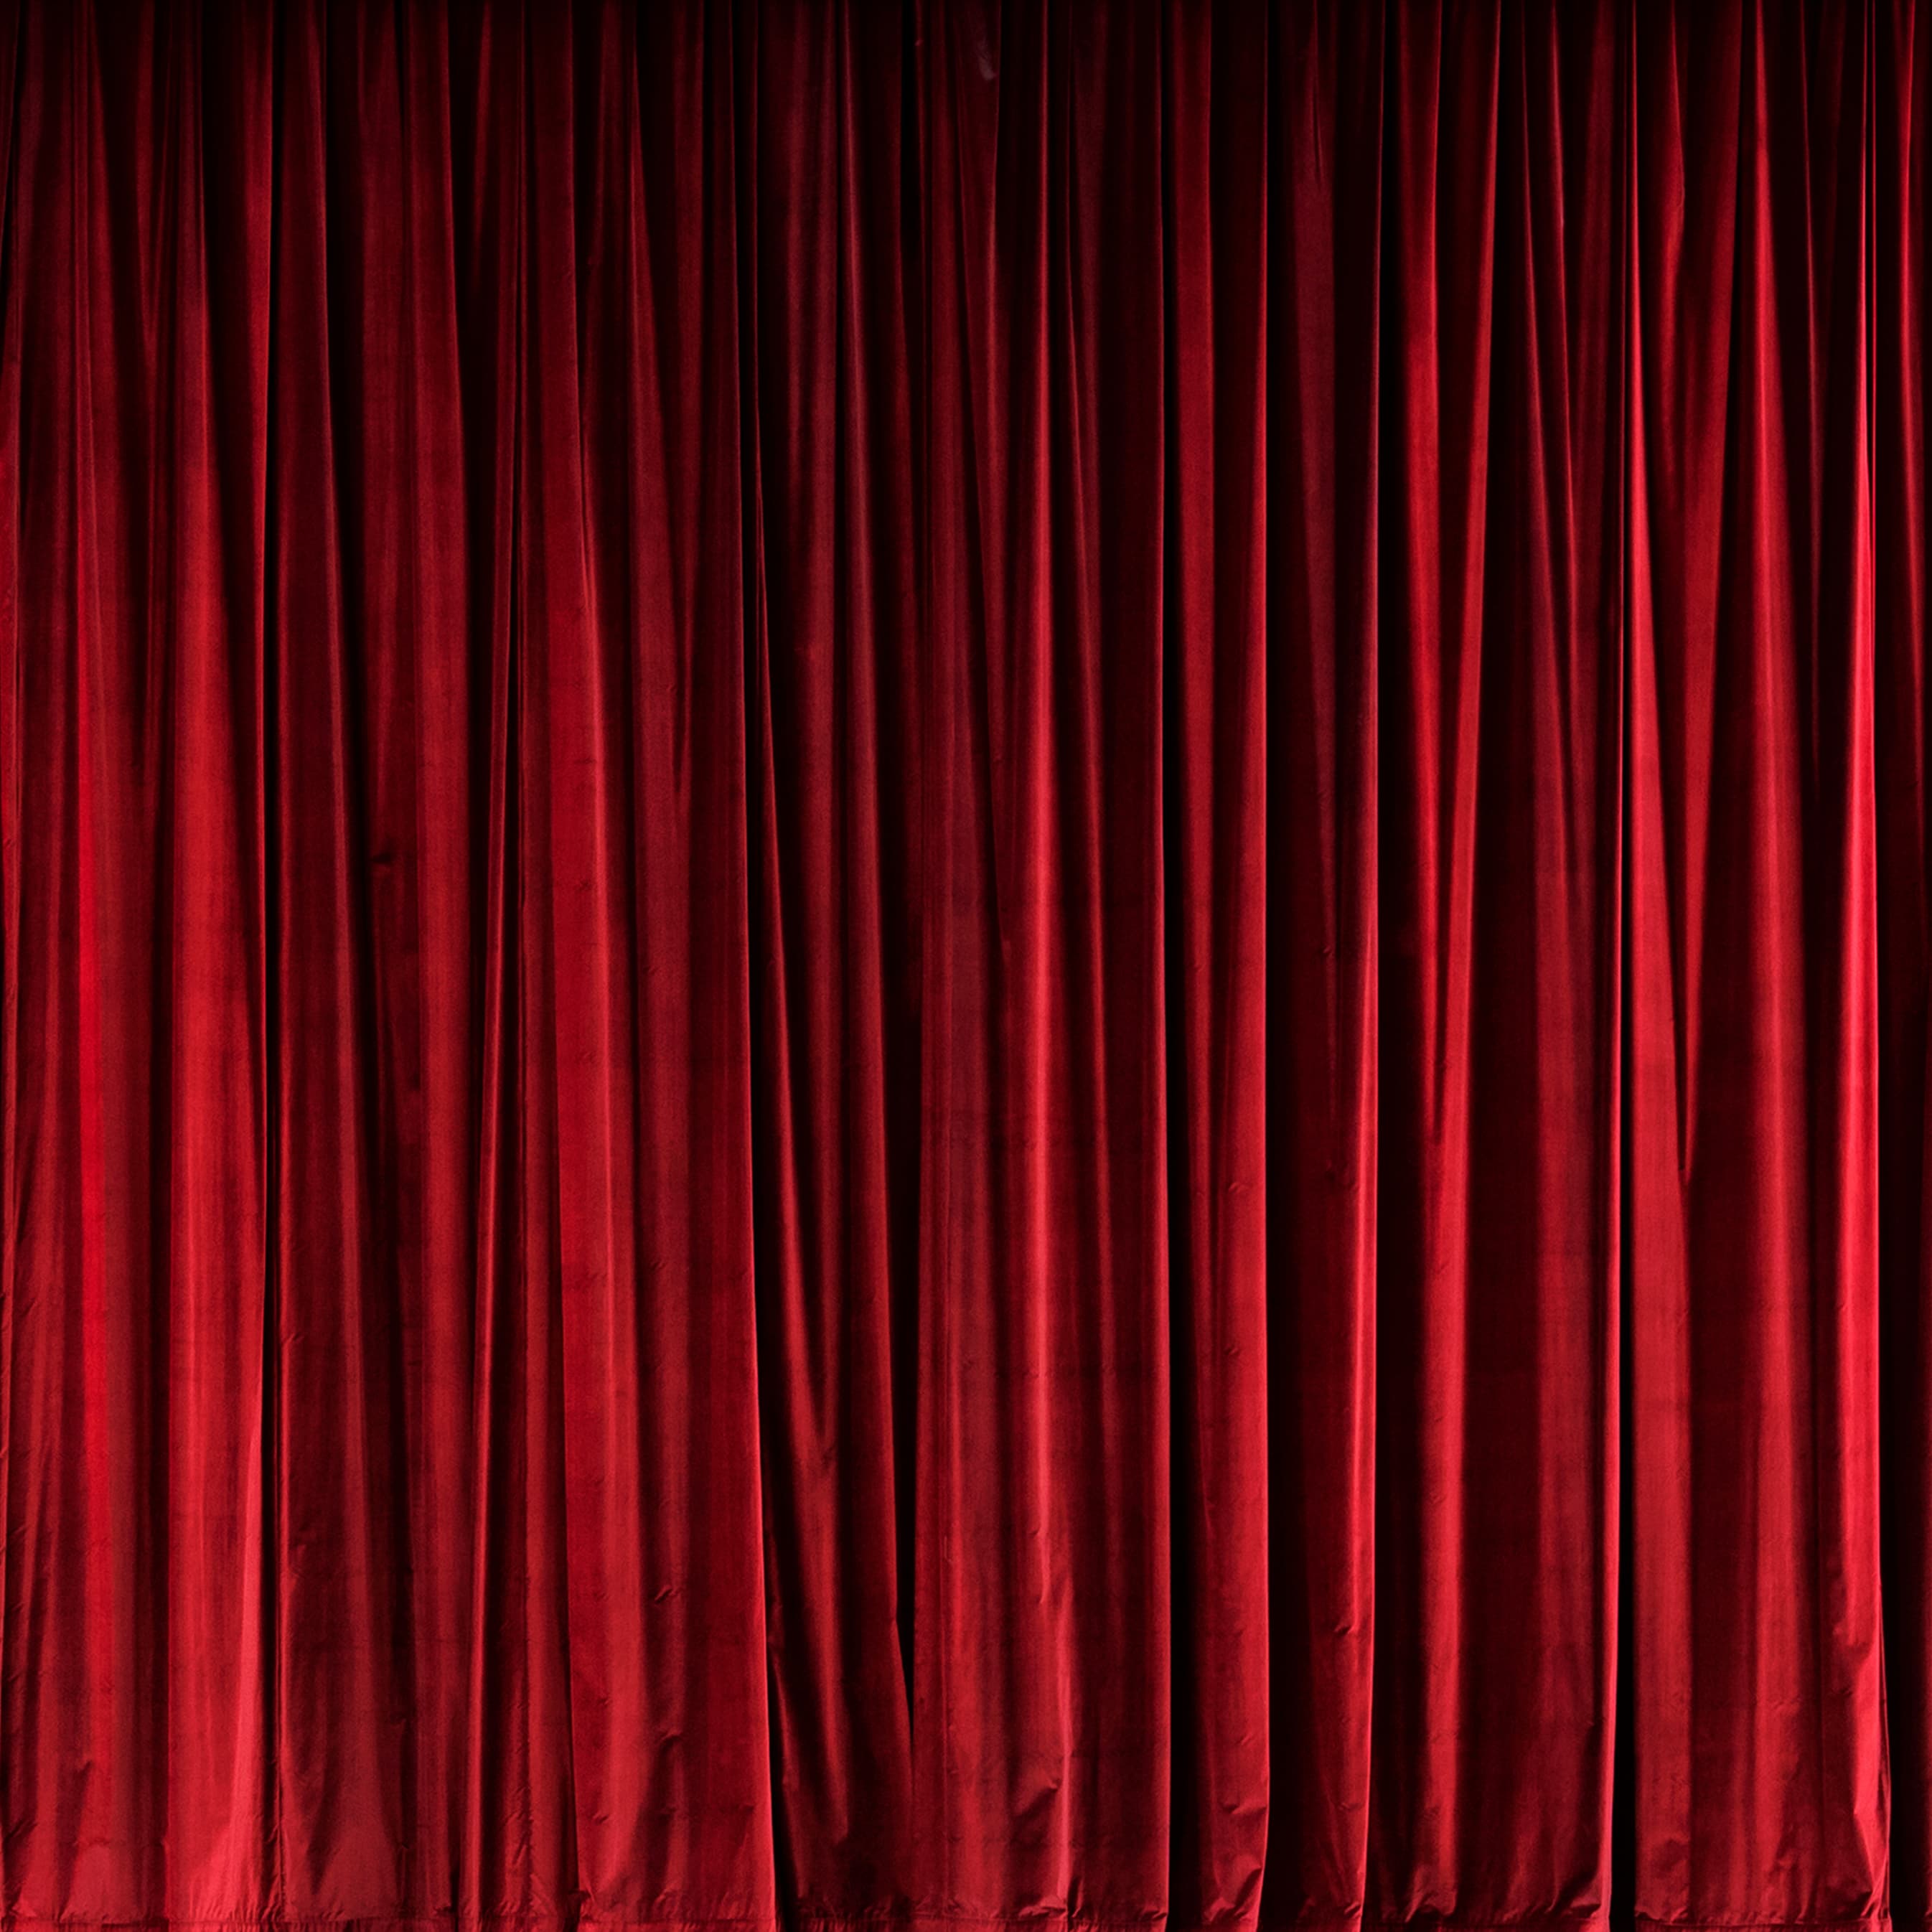 Looking for something fun to do tonight? Get your tickets for the best live shows in Valencia: theater, stand-up comedy, musicals, magic, and much more.